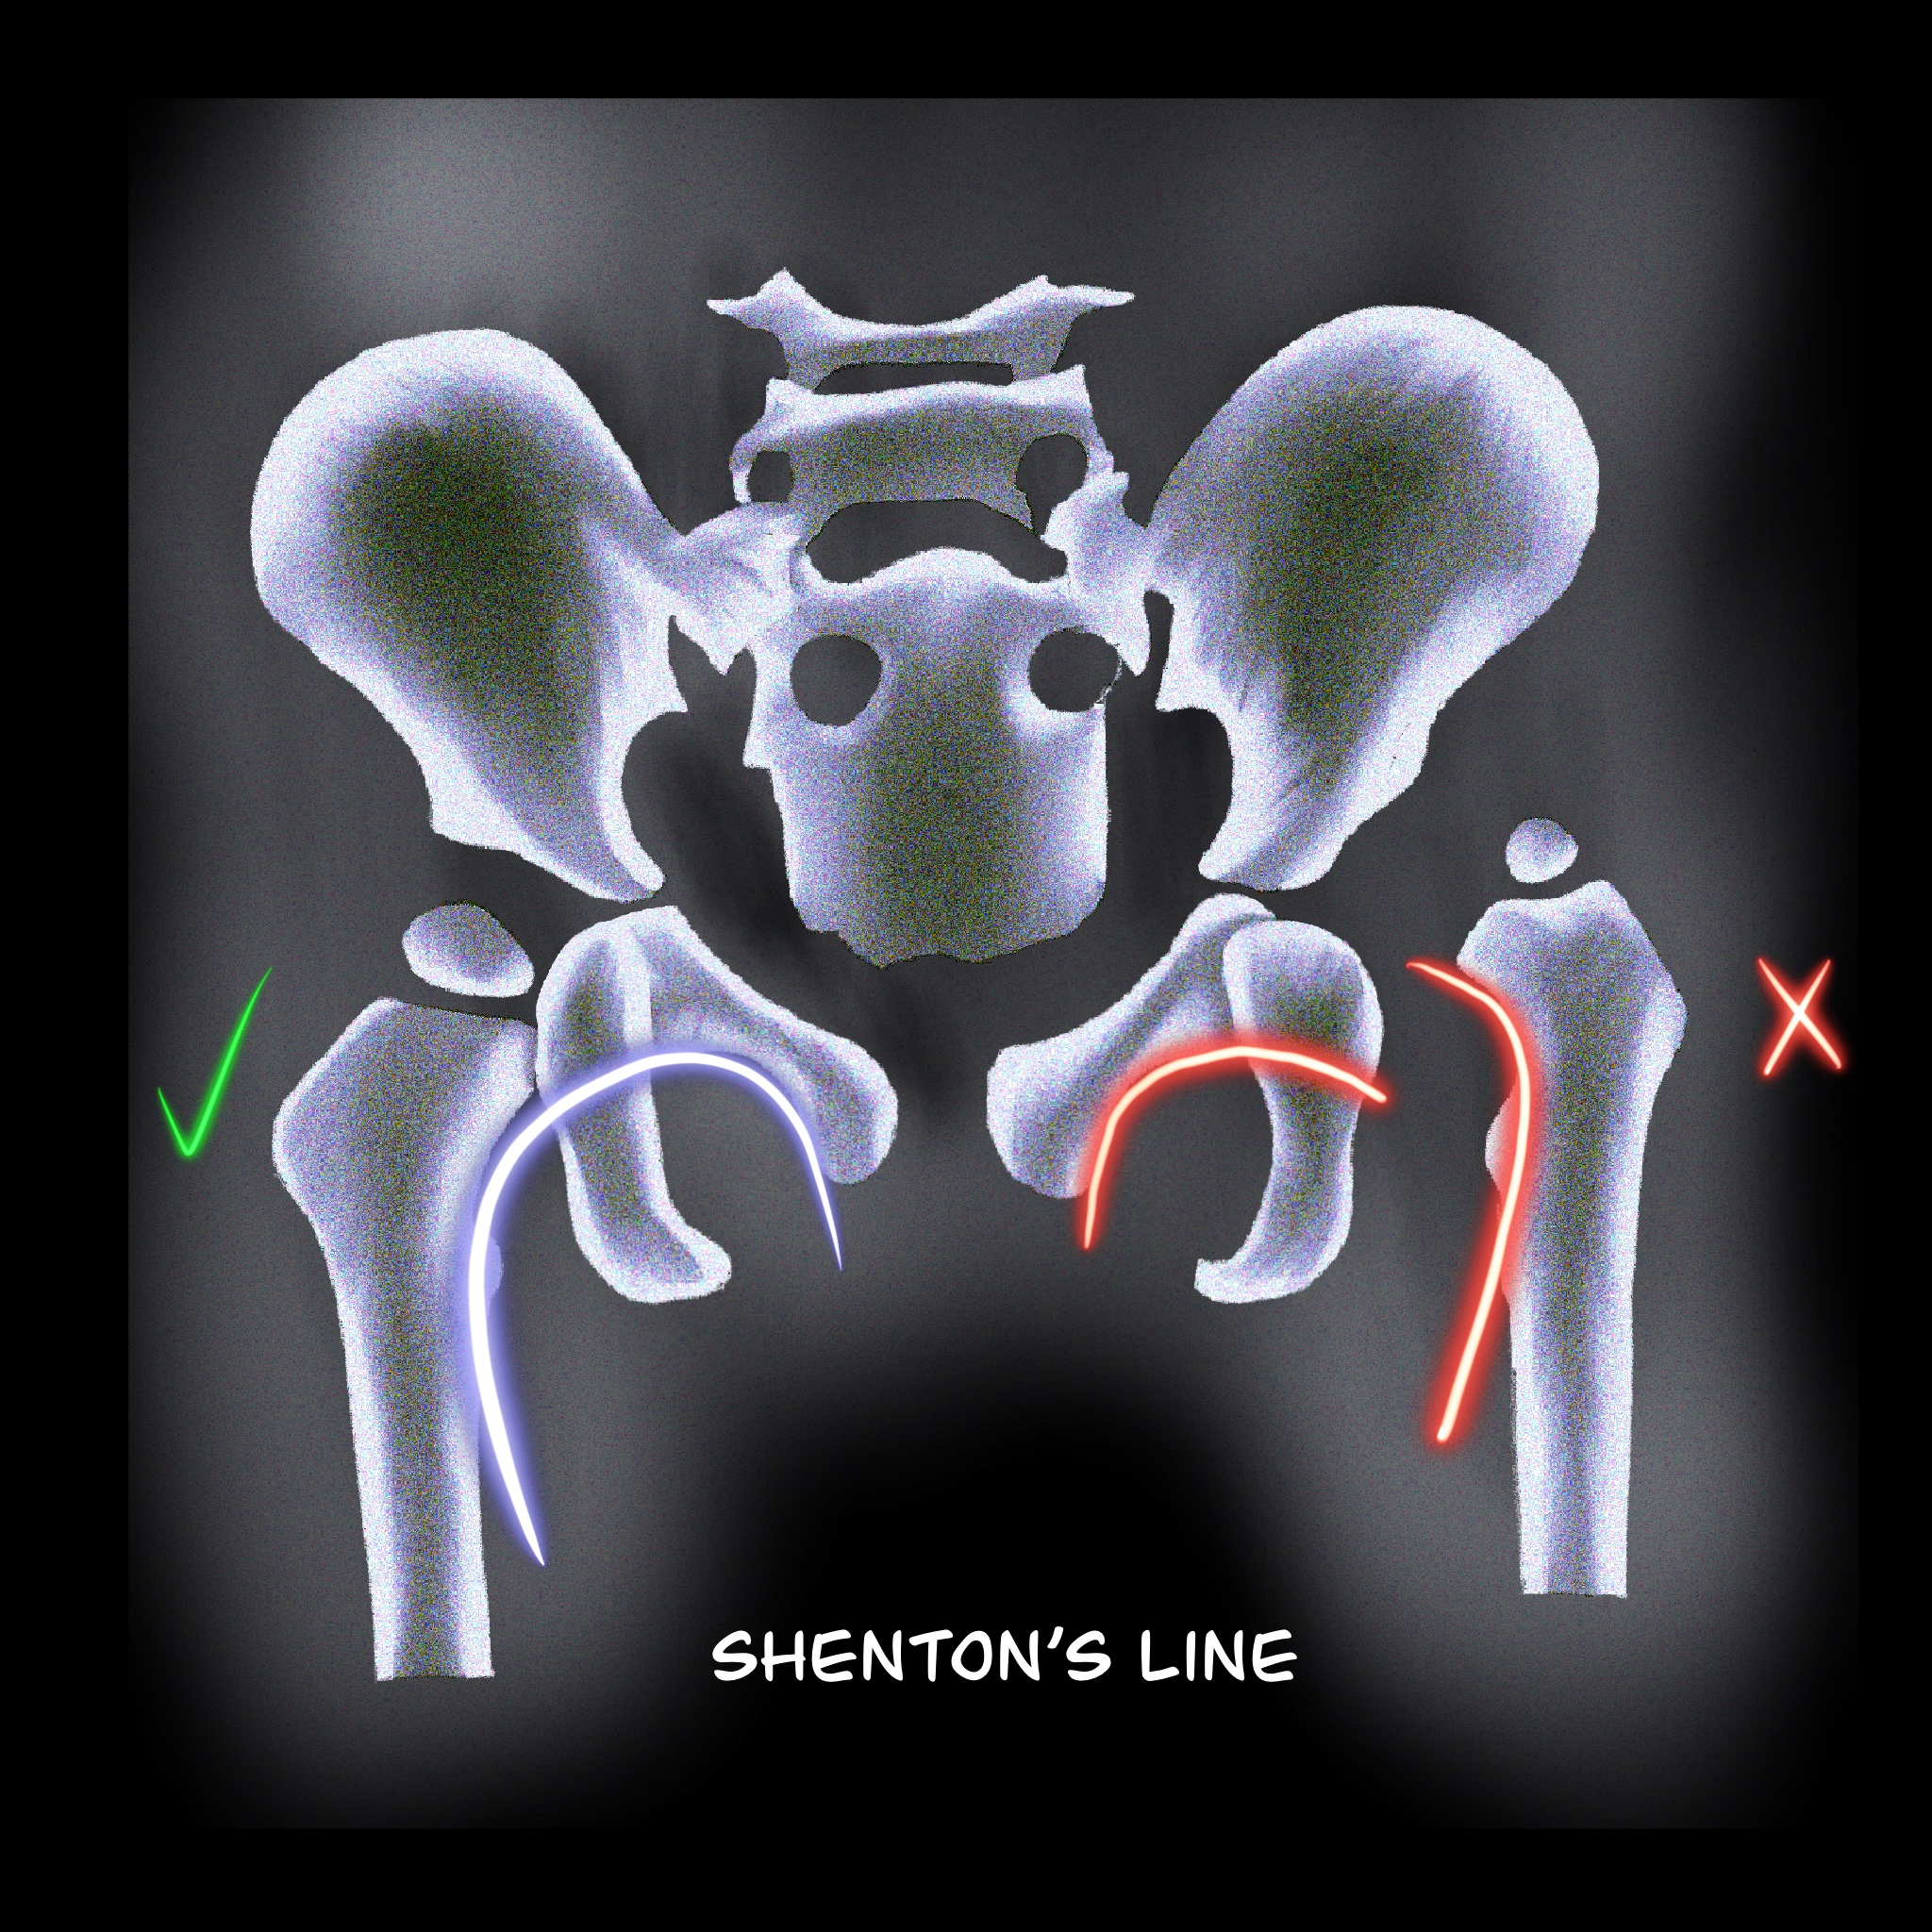 <p>Shenton Line. Any disruption of the line indicates a hip abnormality.</p>